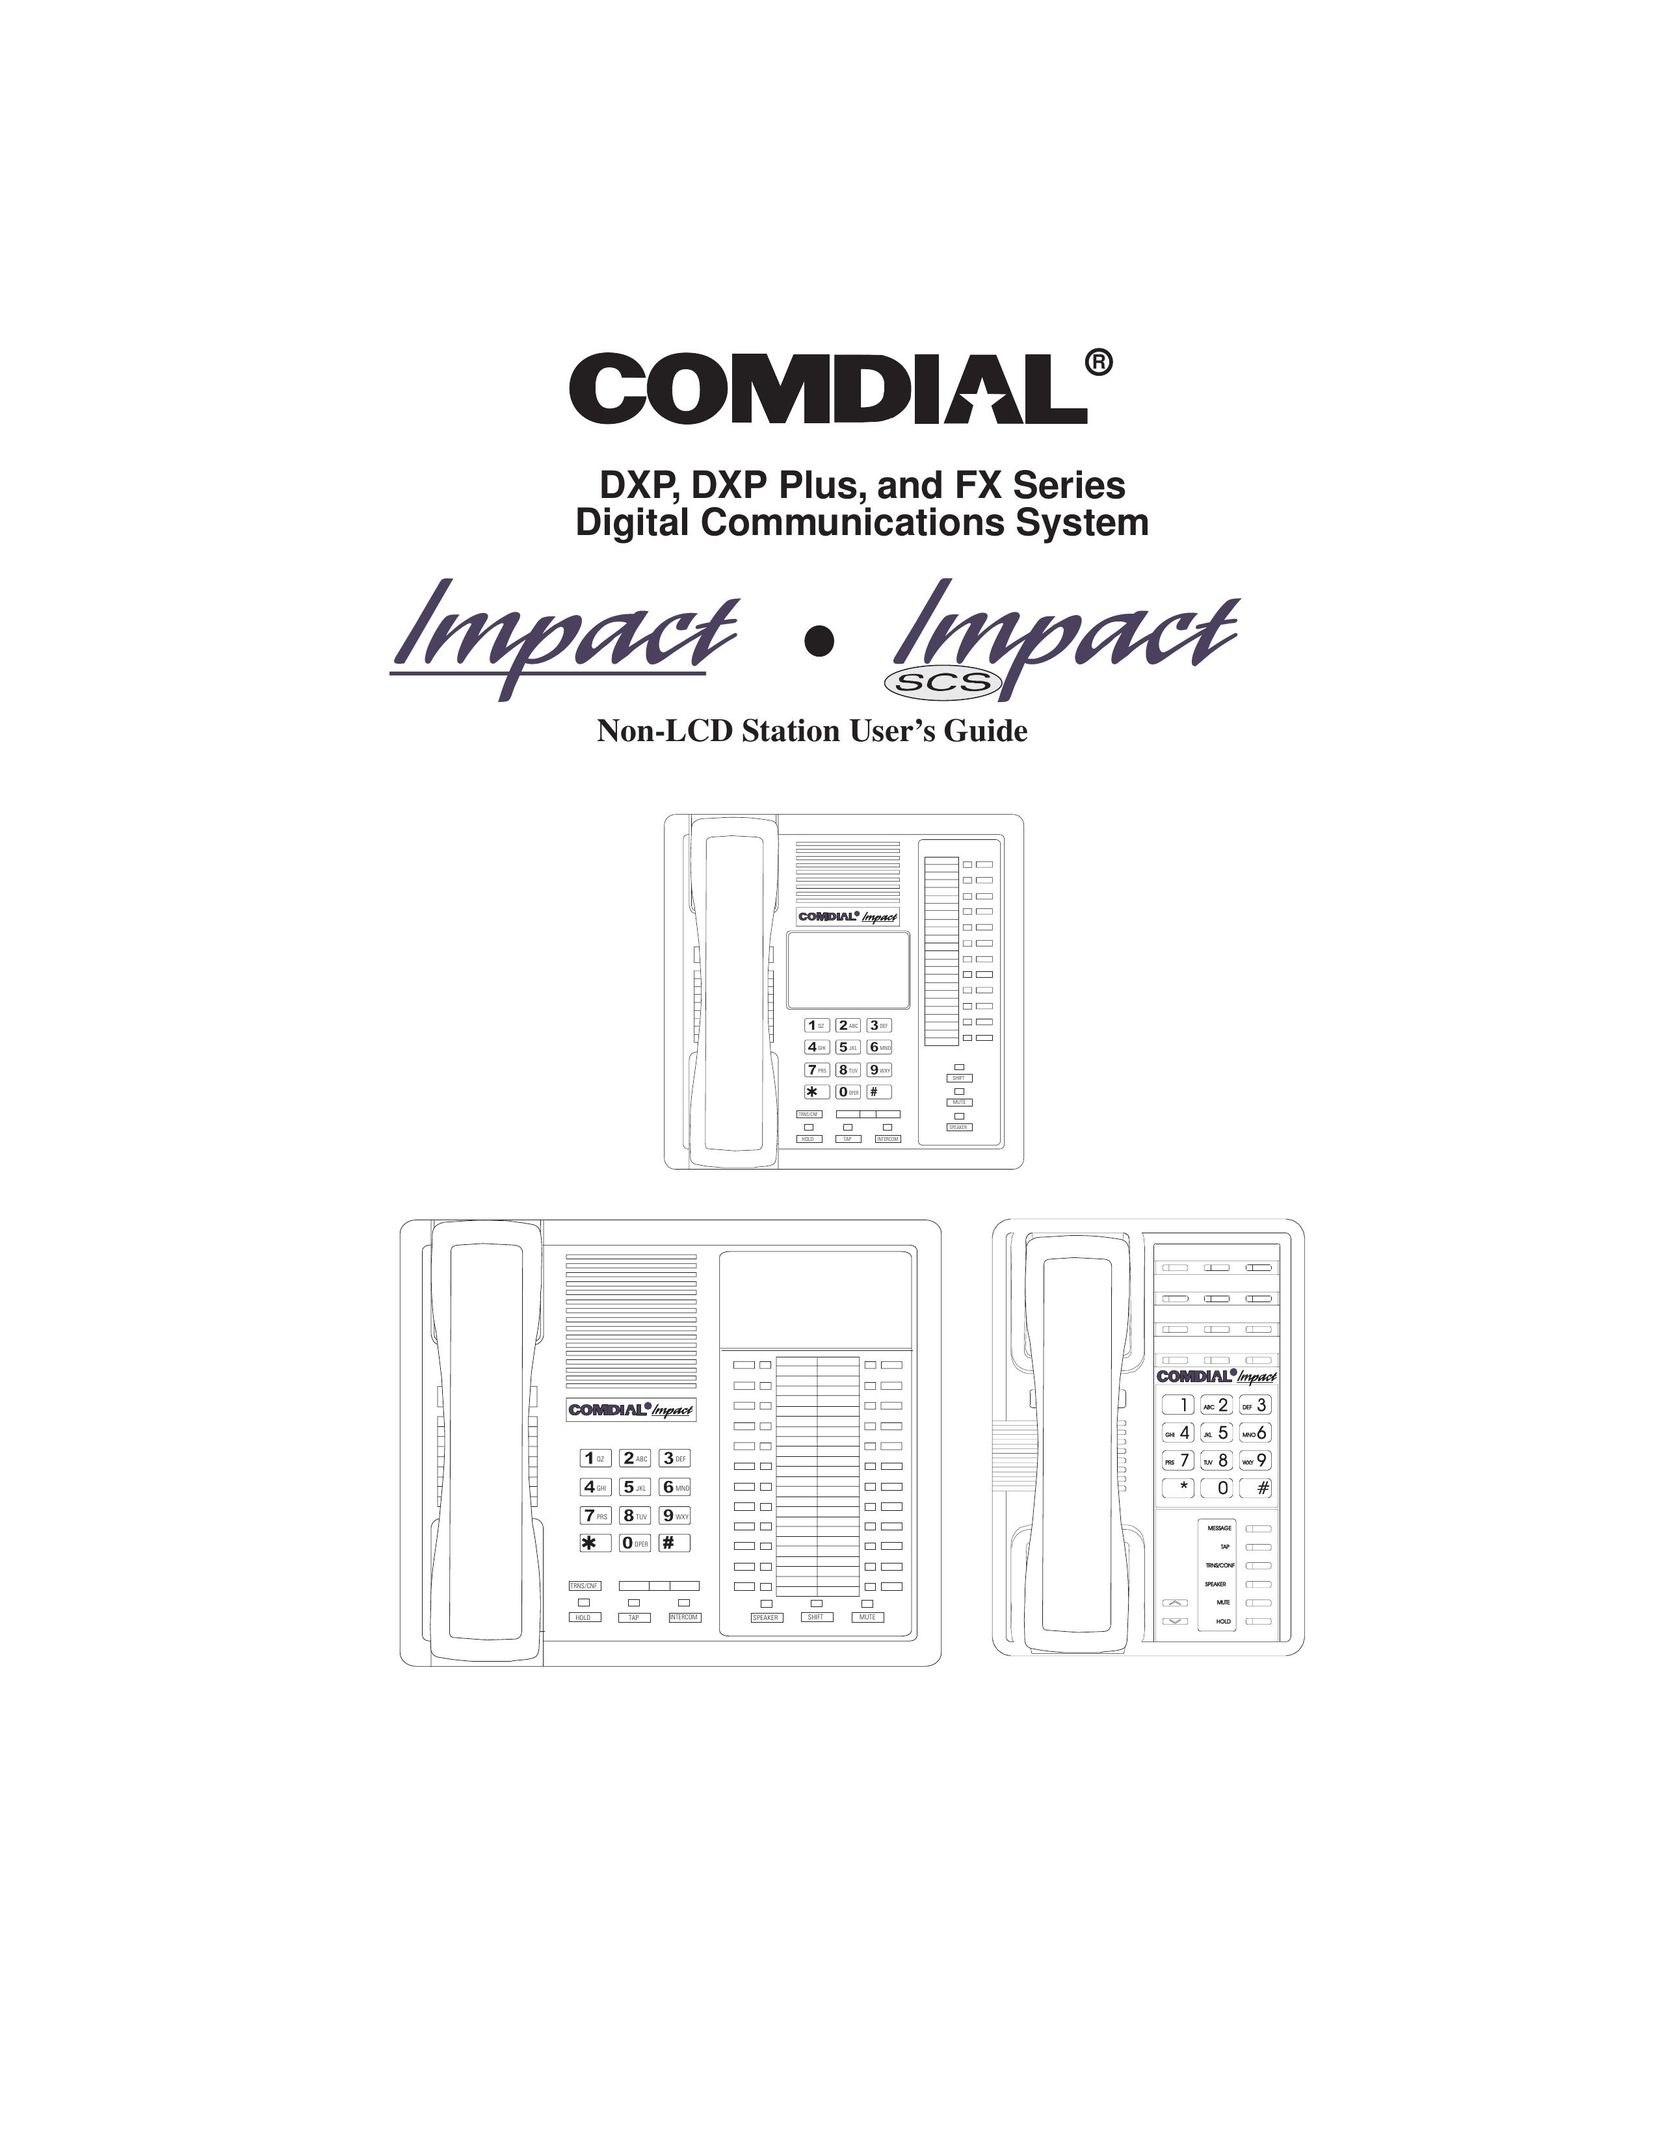 Vertical Communications 8212S Cordless Telephone User Manual